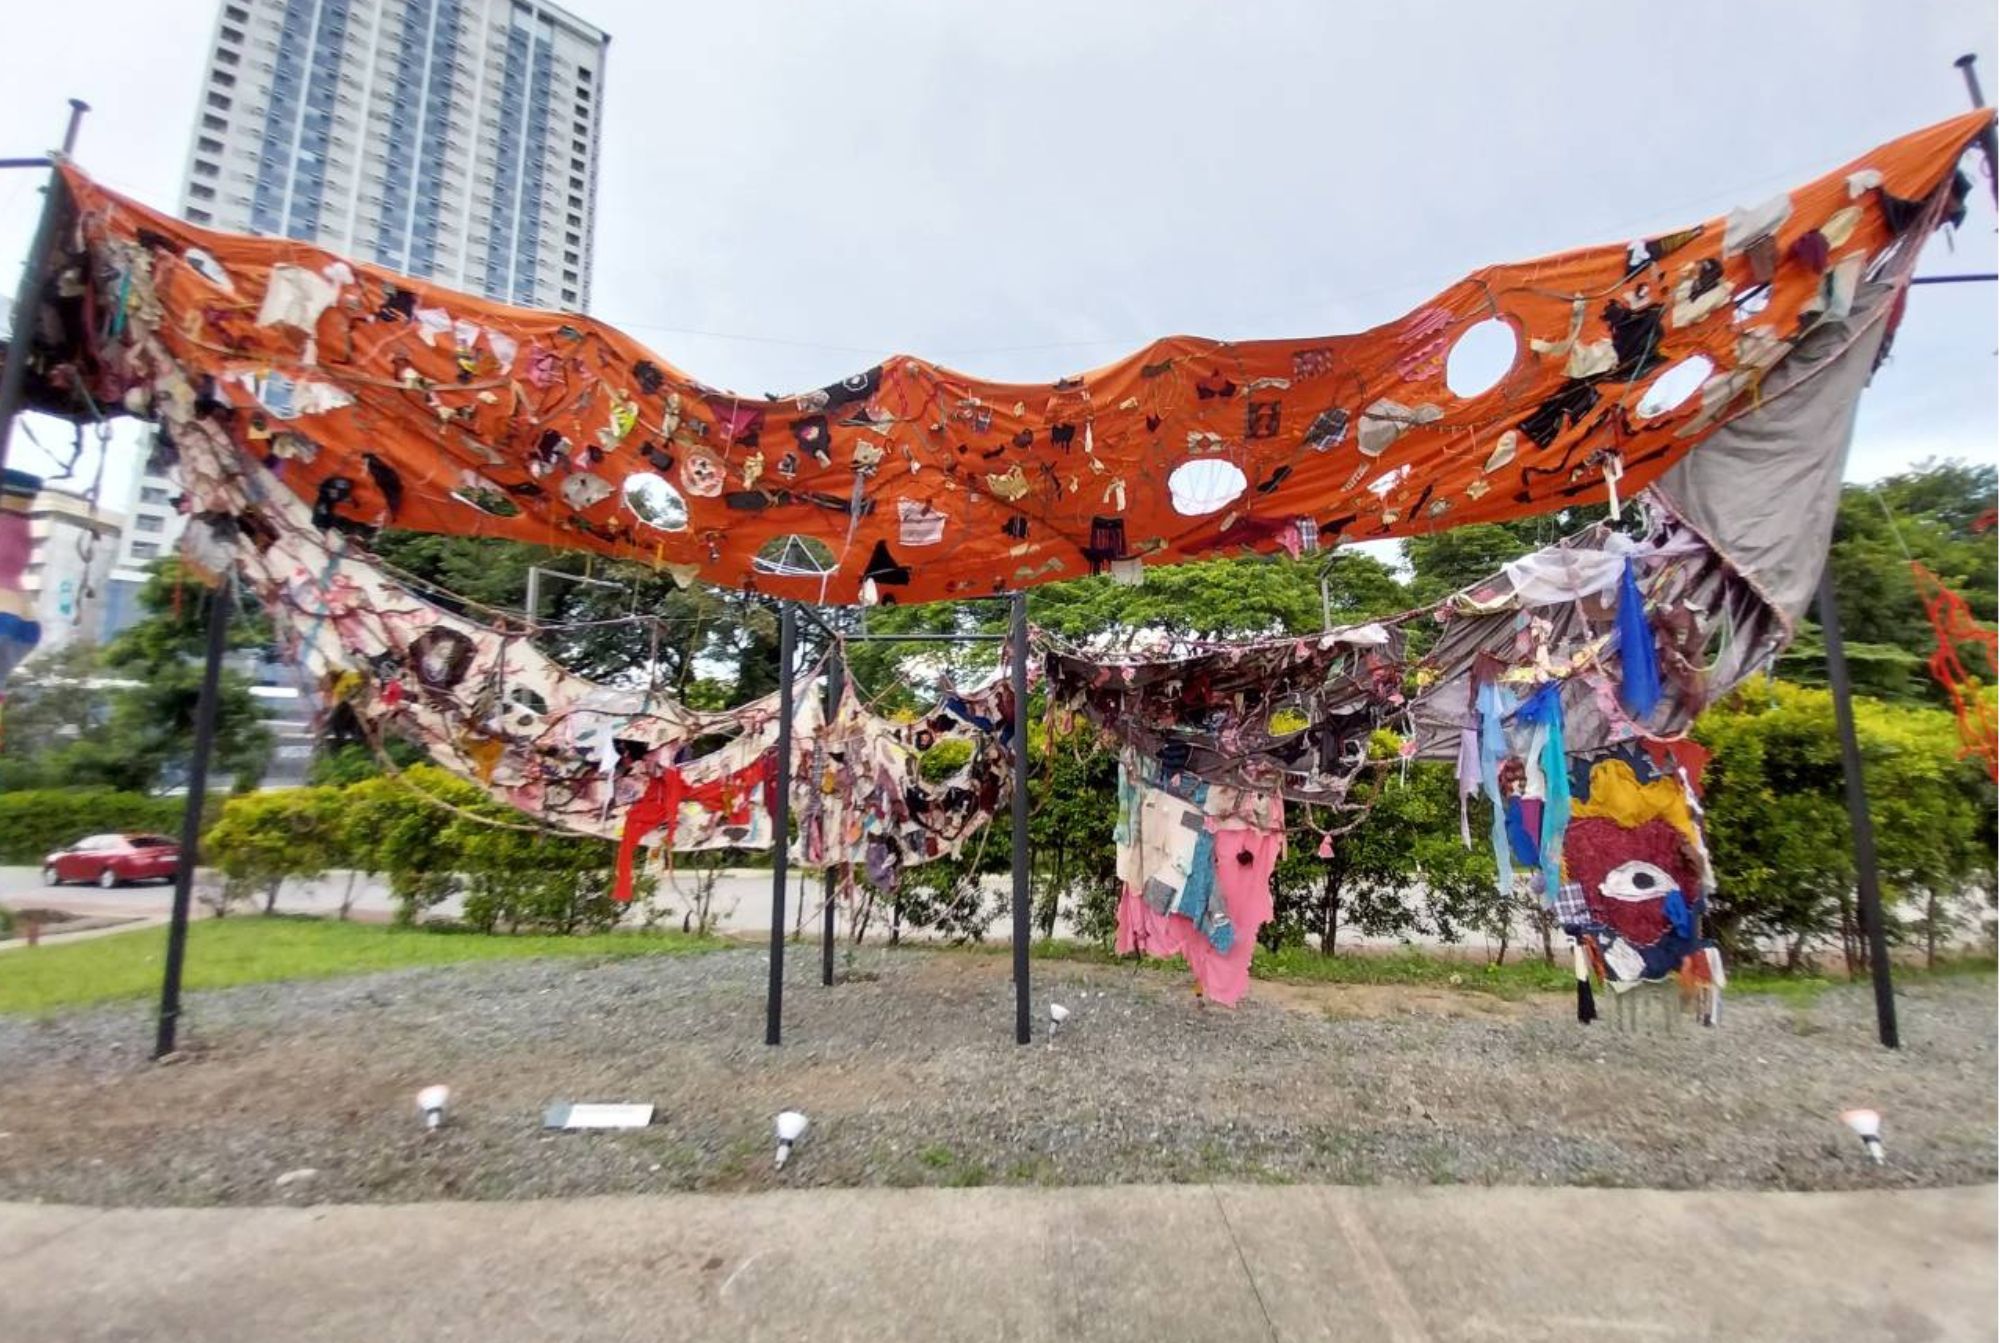 A portion of the fabric canopy of "Portals" in Ateneo Art Gallery. Photo by Patricia Yap.